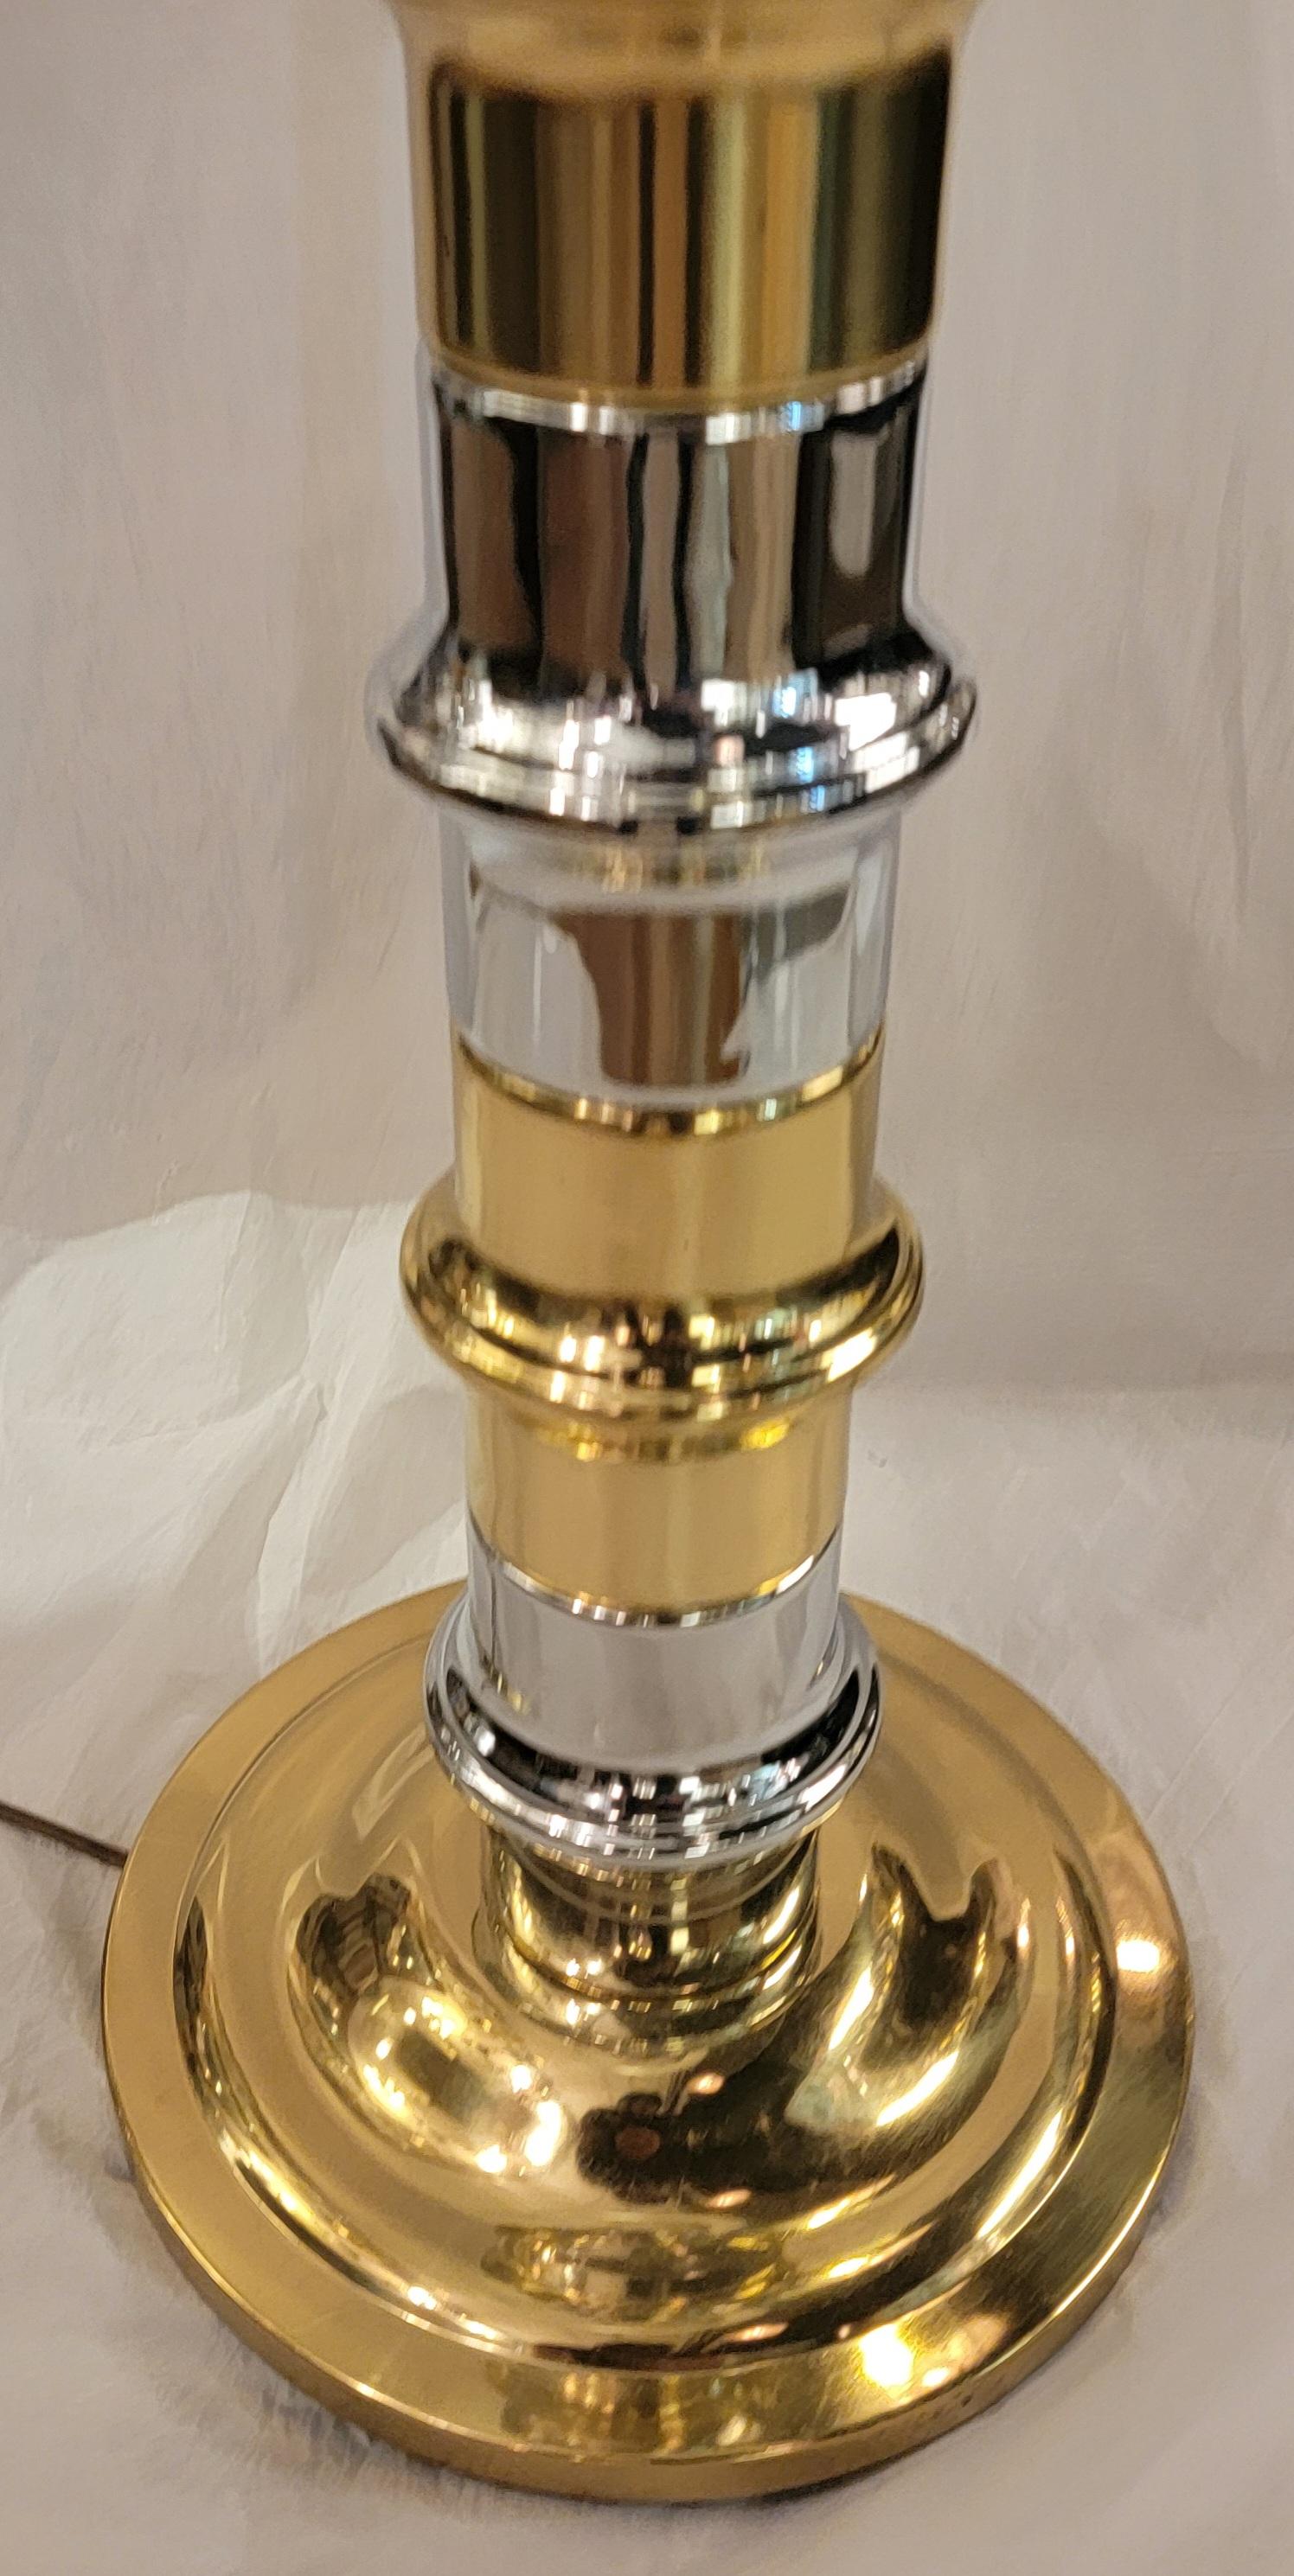 Mid Century Brass and Chrome table lamp. Sections are - 54 high x 18.25diameter
